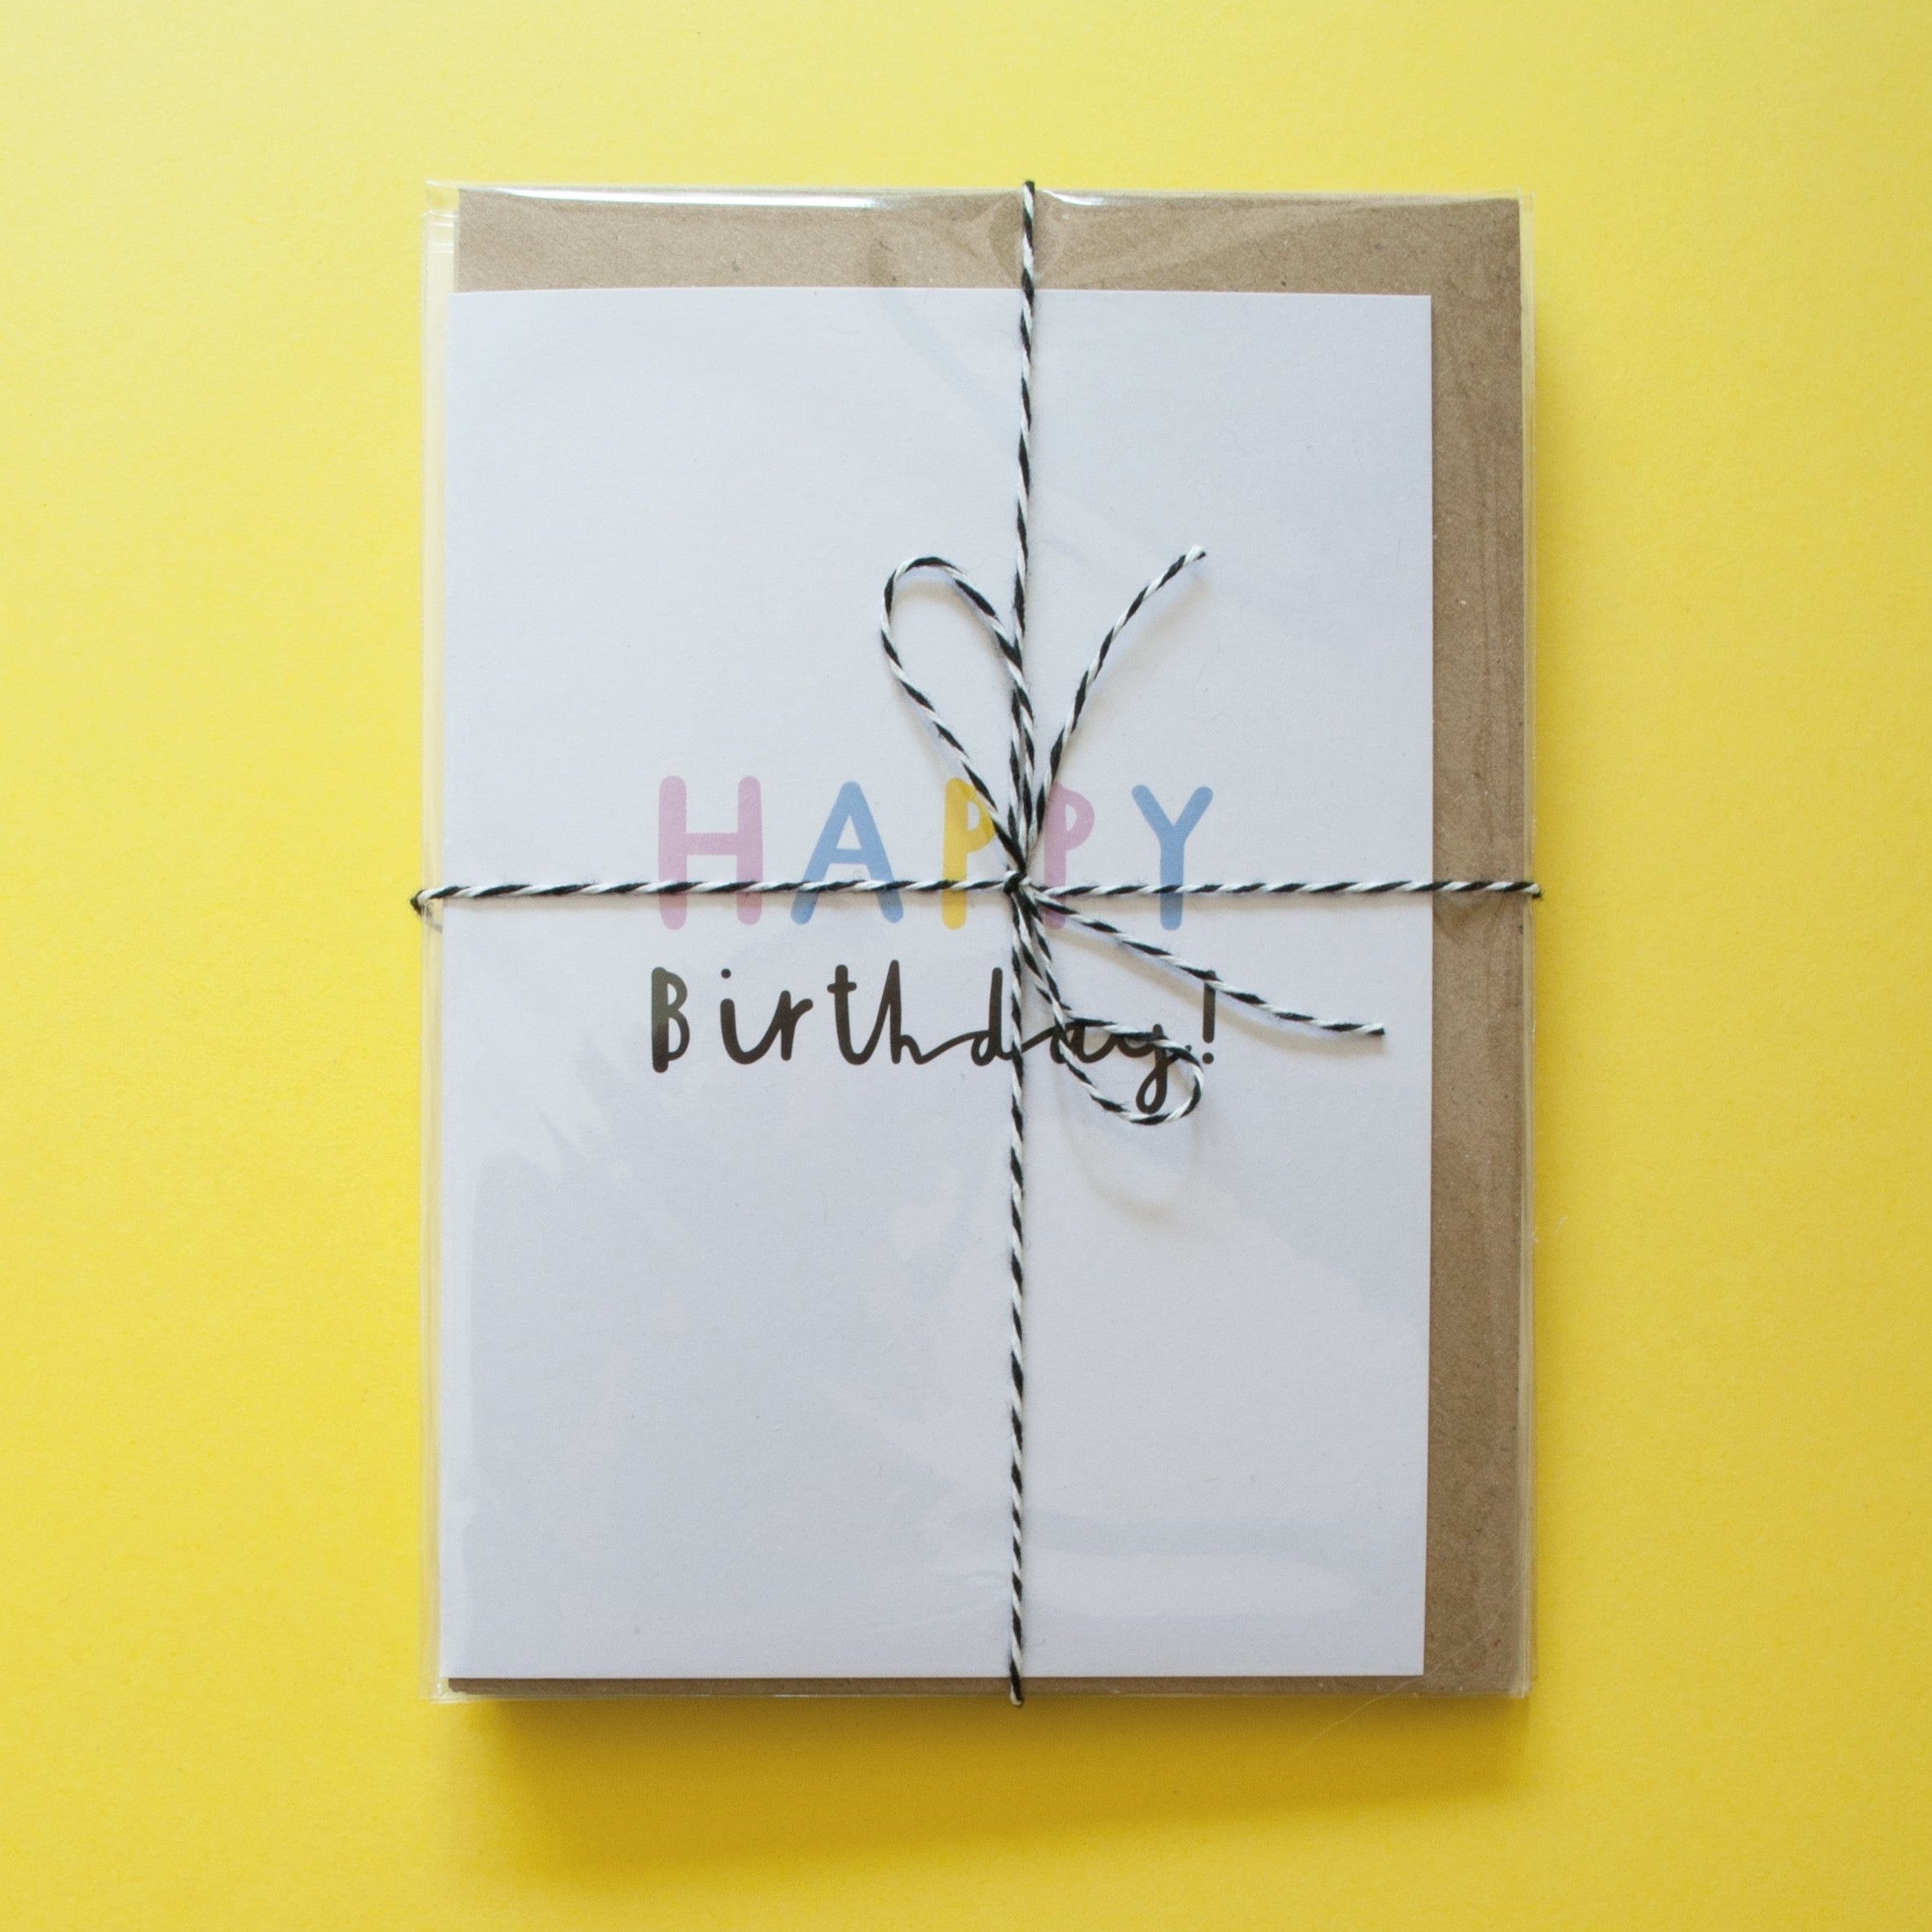 Happy Birthday - A6 Greetings card with envelope - Planet-friendly materials